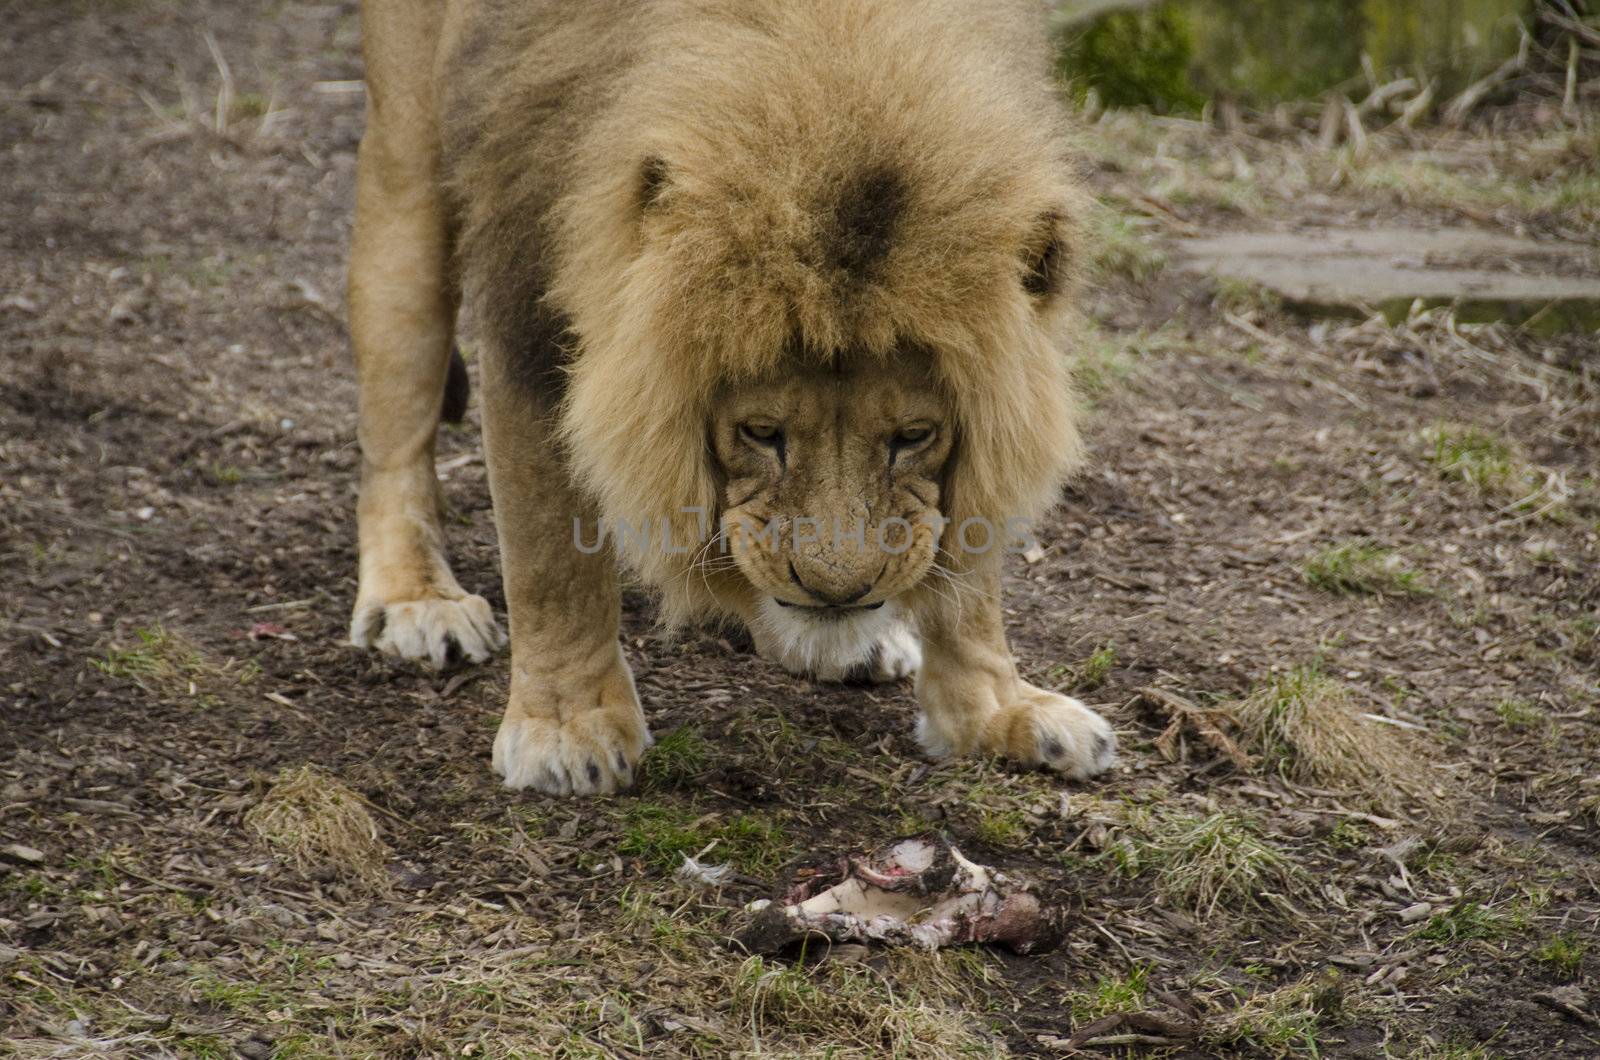 Male lion eating on grass in winter